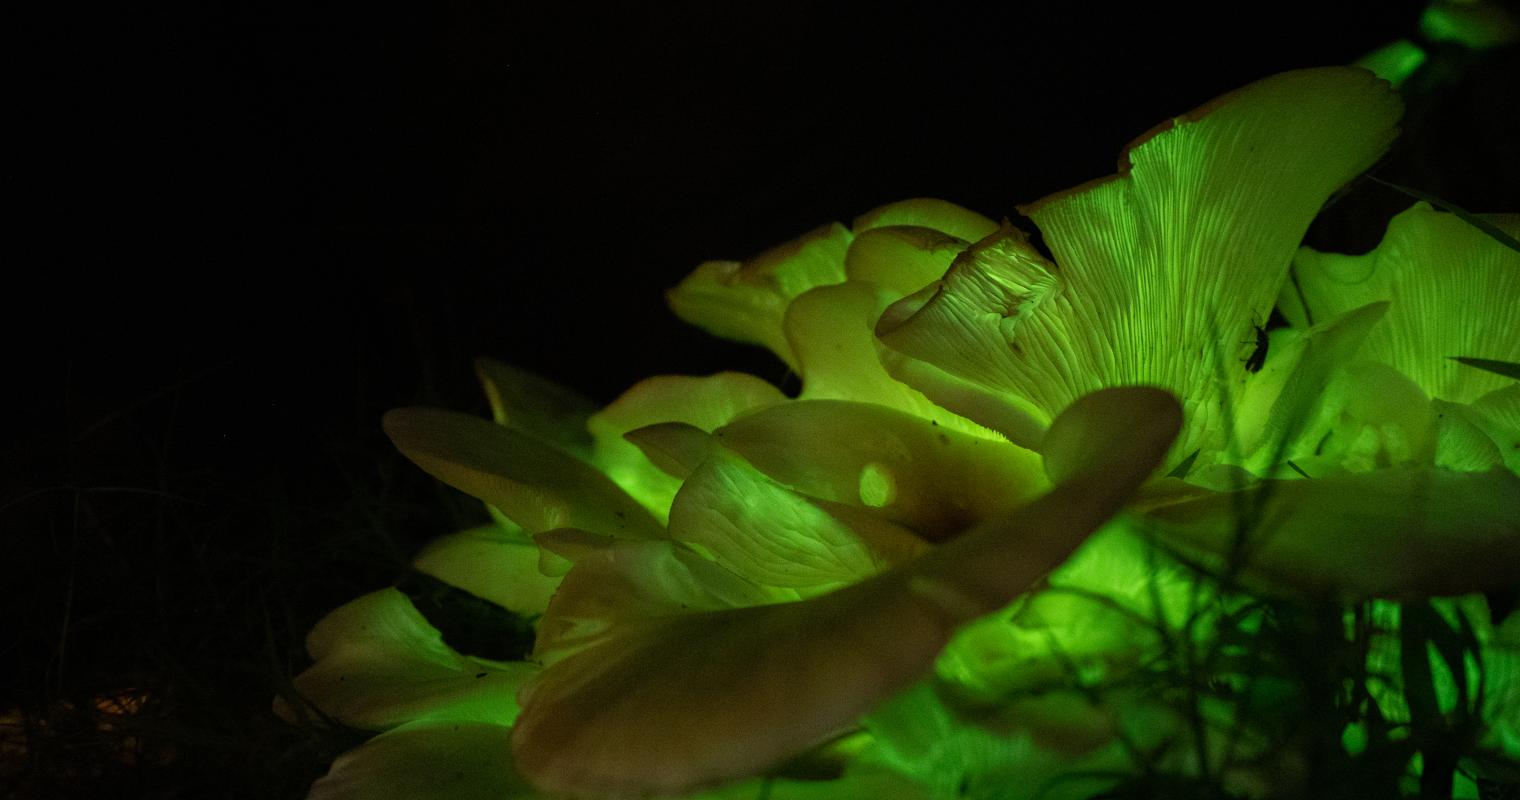 image of a glowing pond